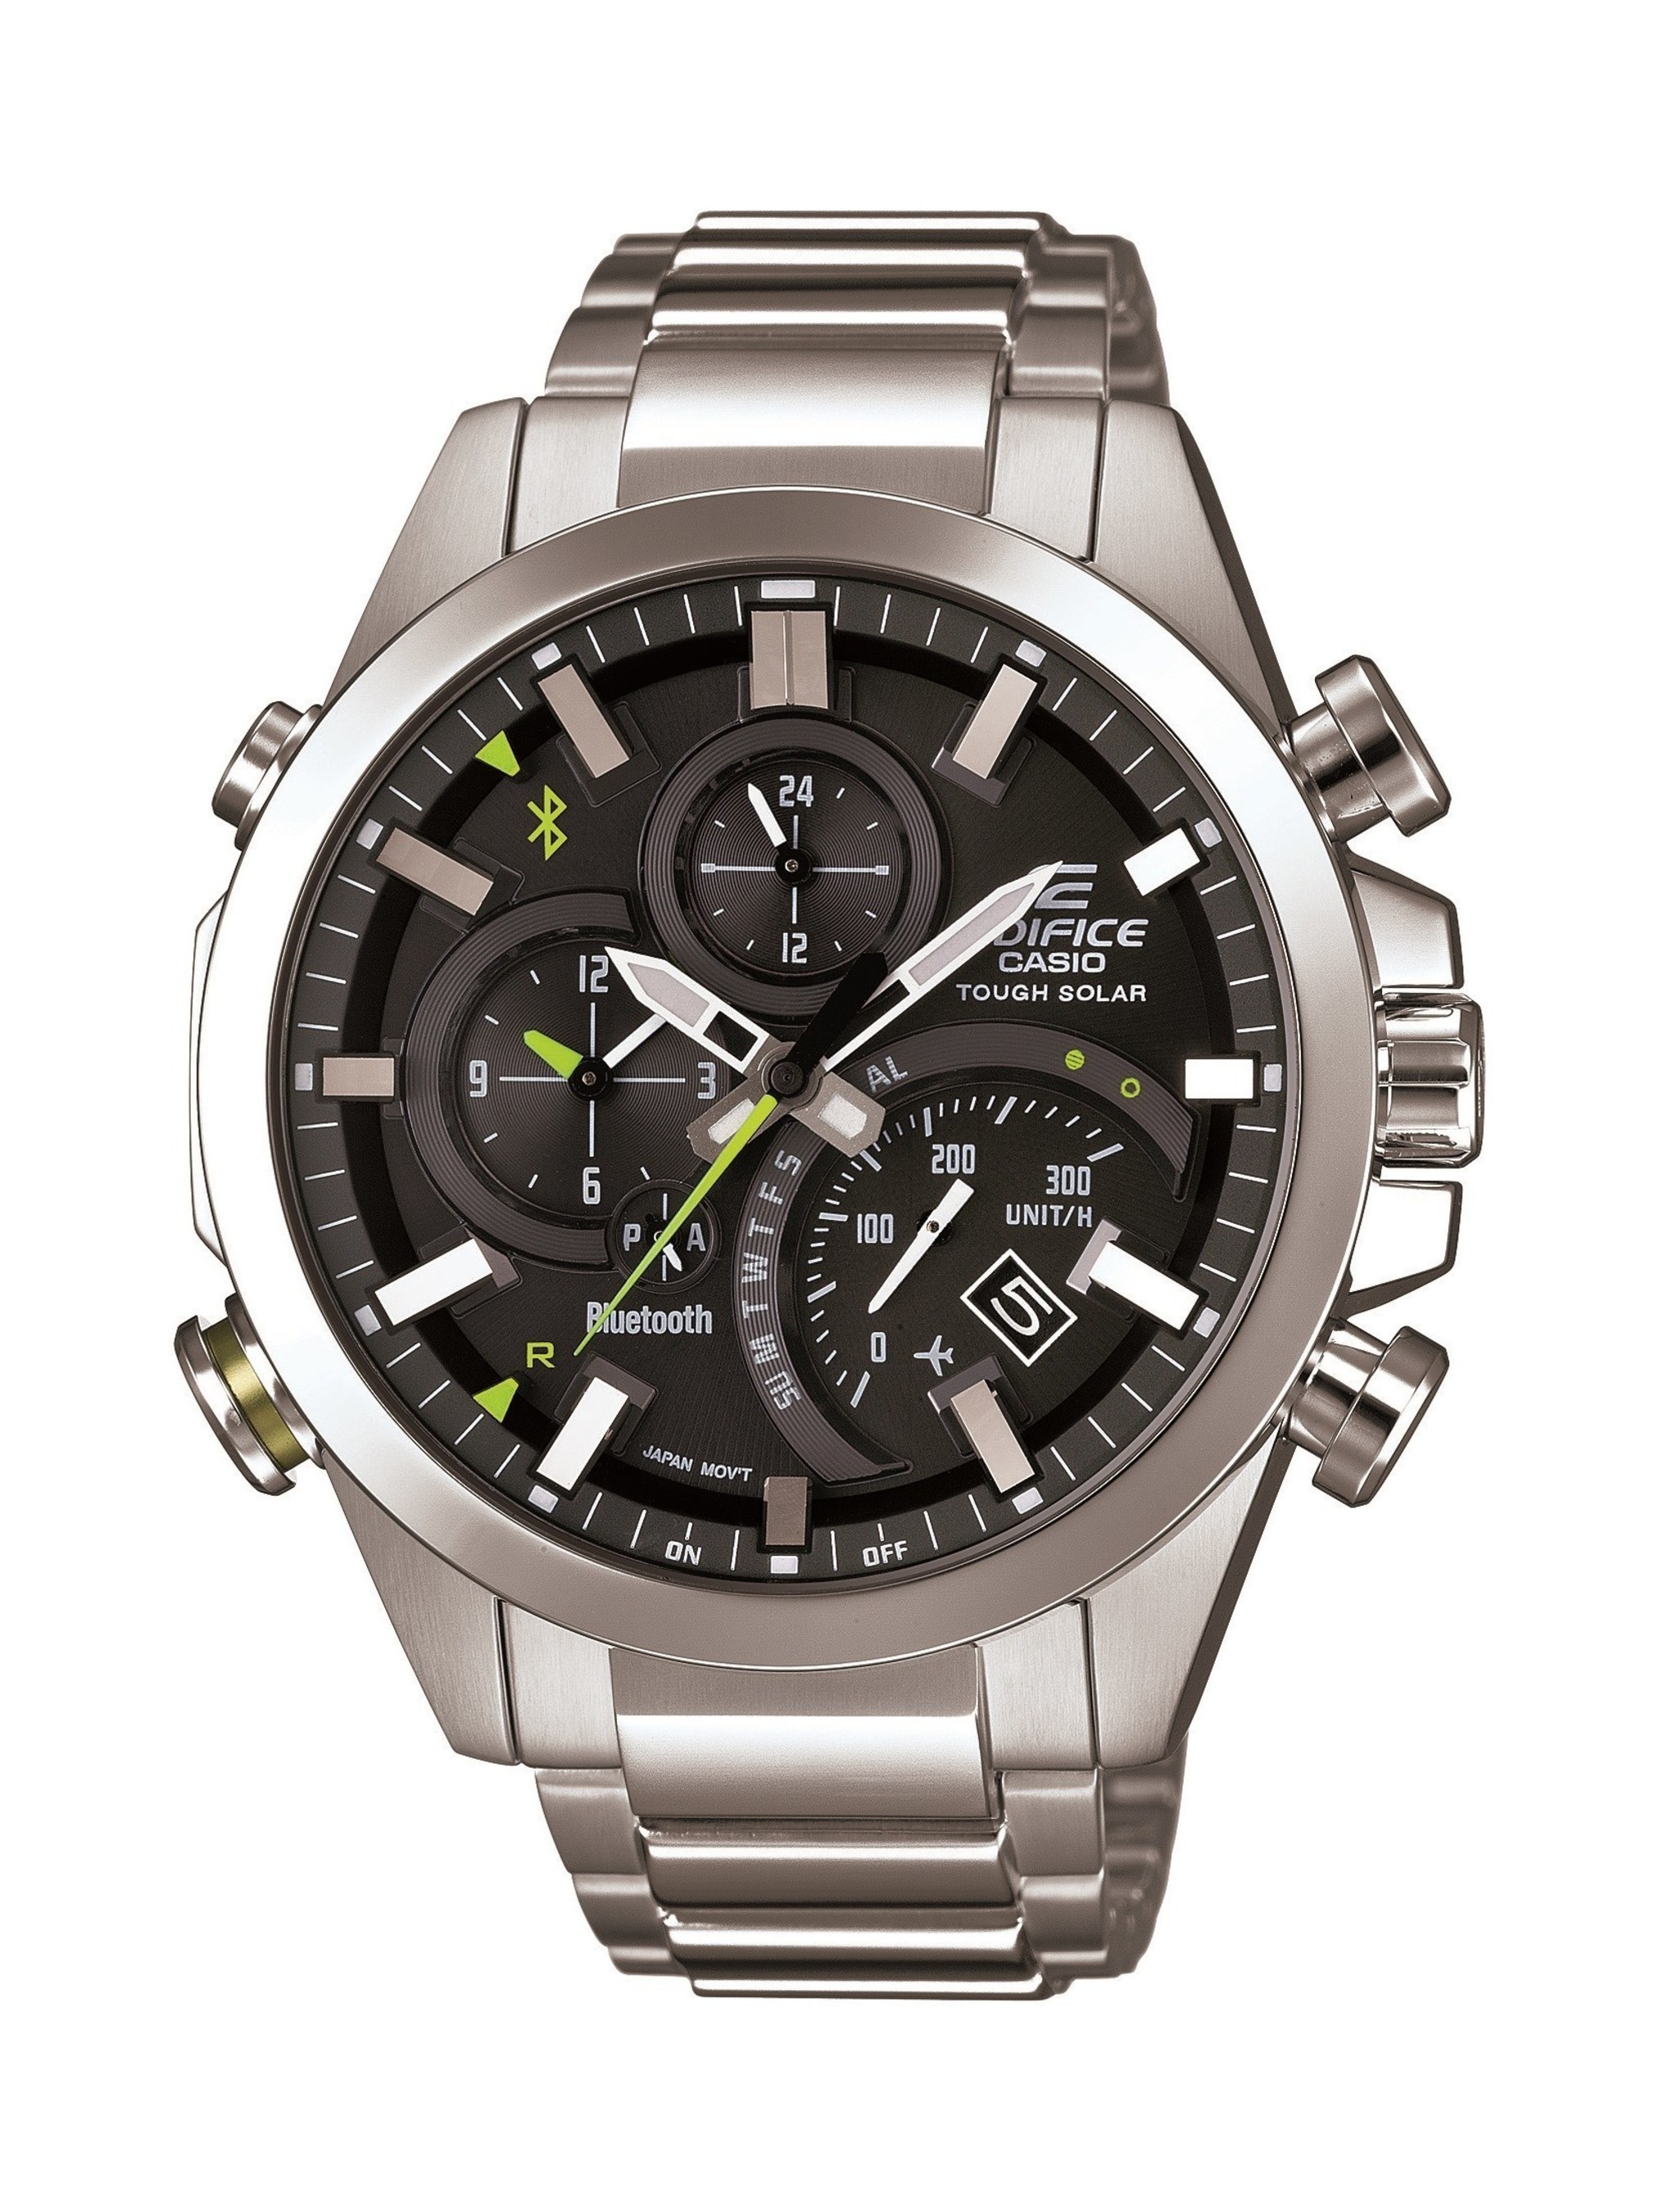 CASIO'S EDIFICE TIMEPIECES HELP WORLD TRAVELERS 'FALL BACK'